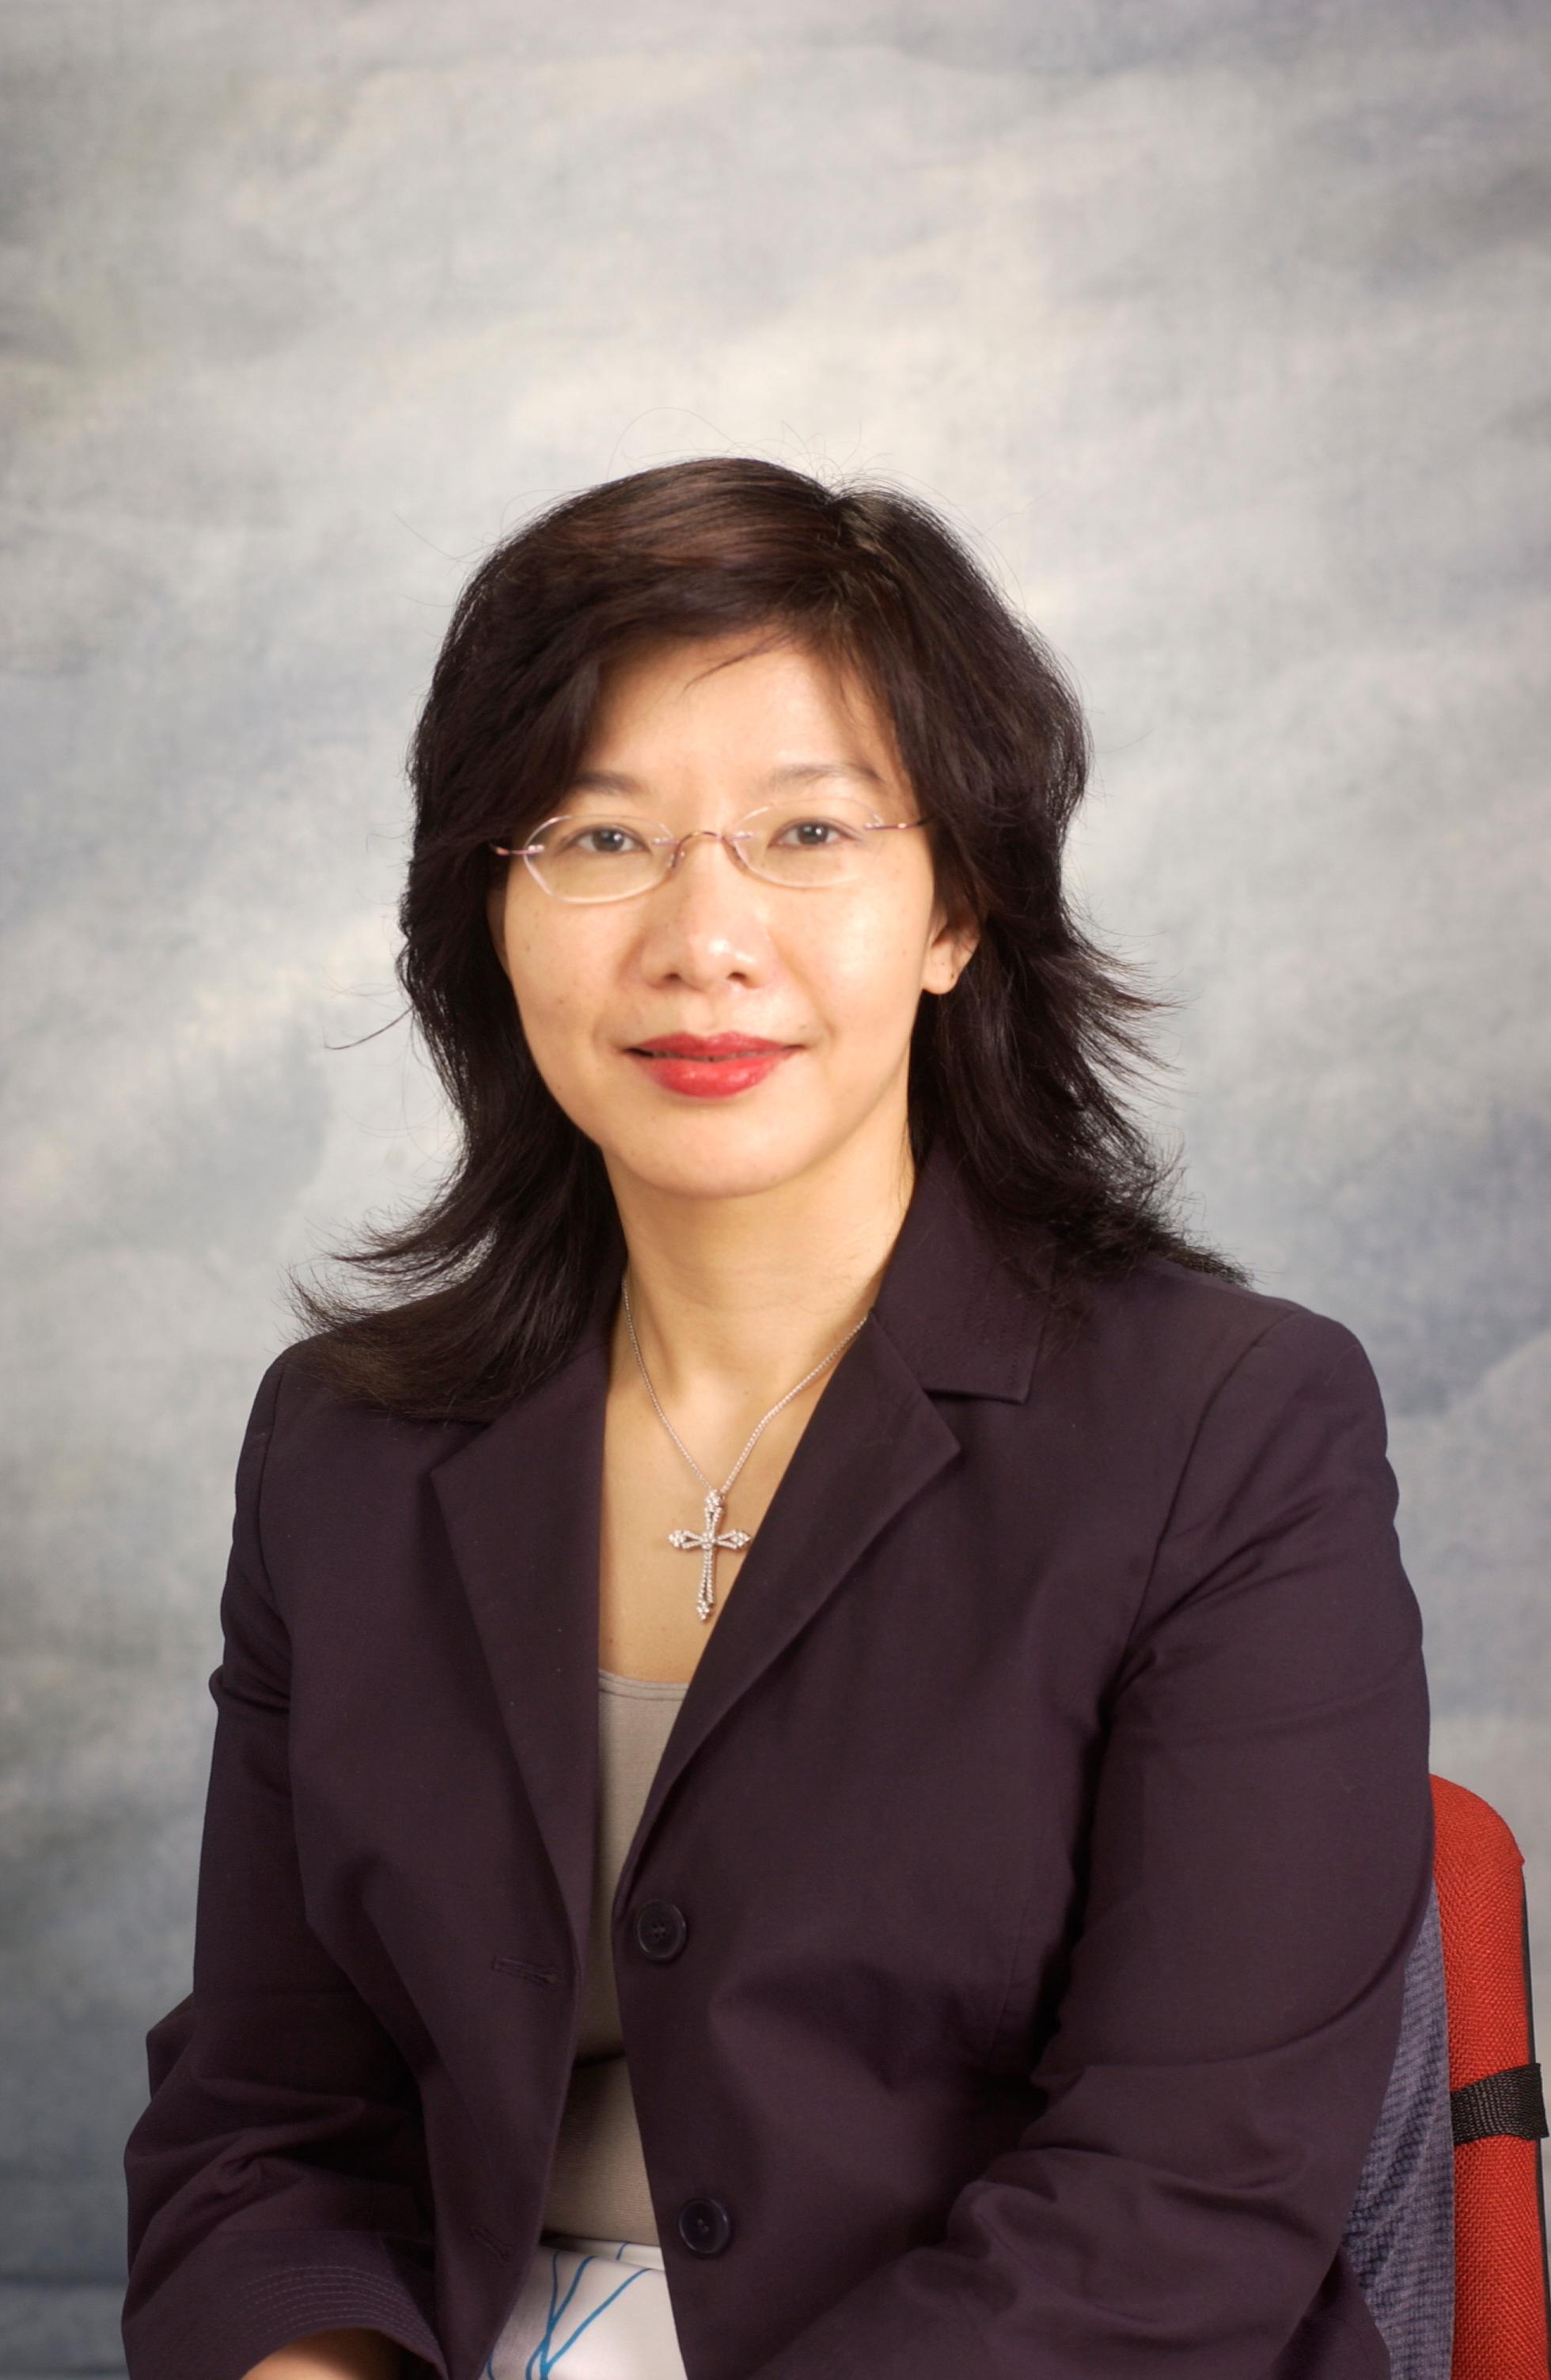 Miss Janice Tse Siu-wa, Permanent Secretary for the Environment/Director of Environmental Protection, will assume the post of Permanent Secretary for Environment and Ecology (Environment)/Director of Environmental Protection on July 1, 2022.